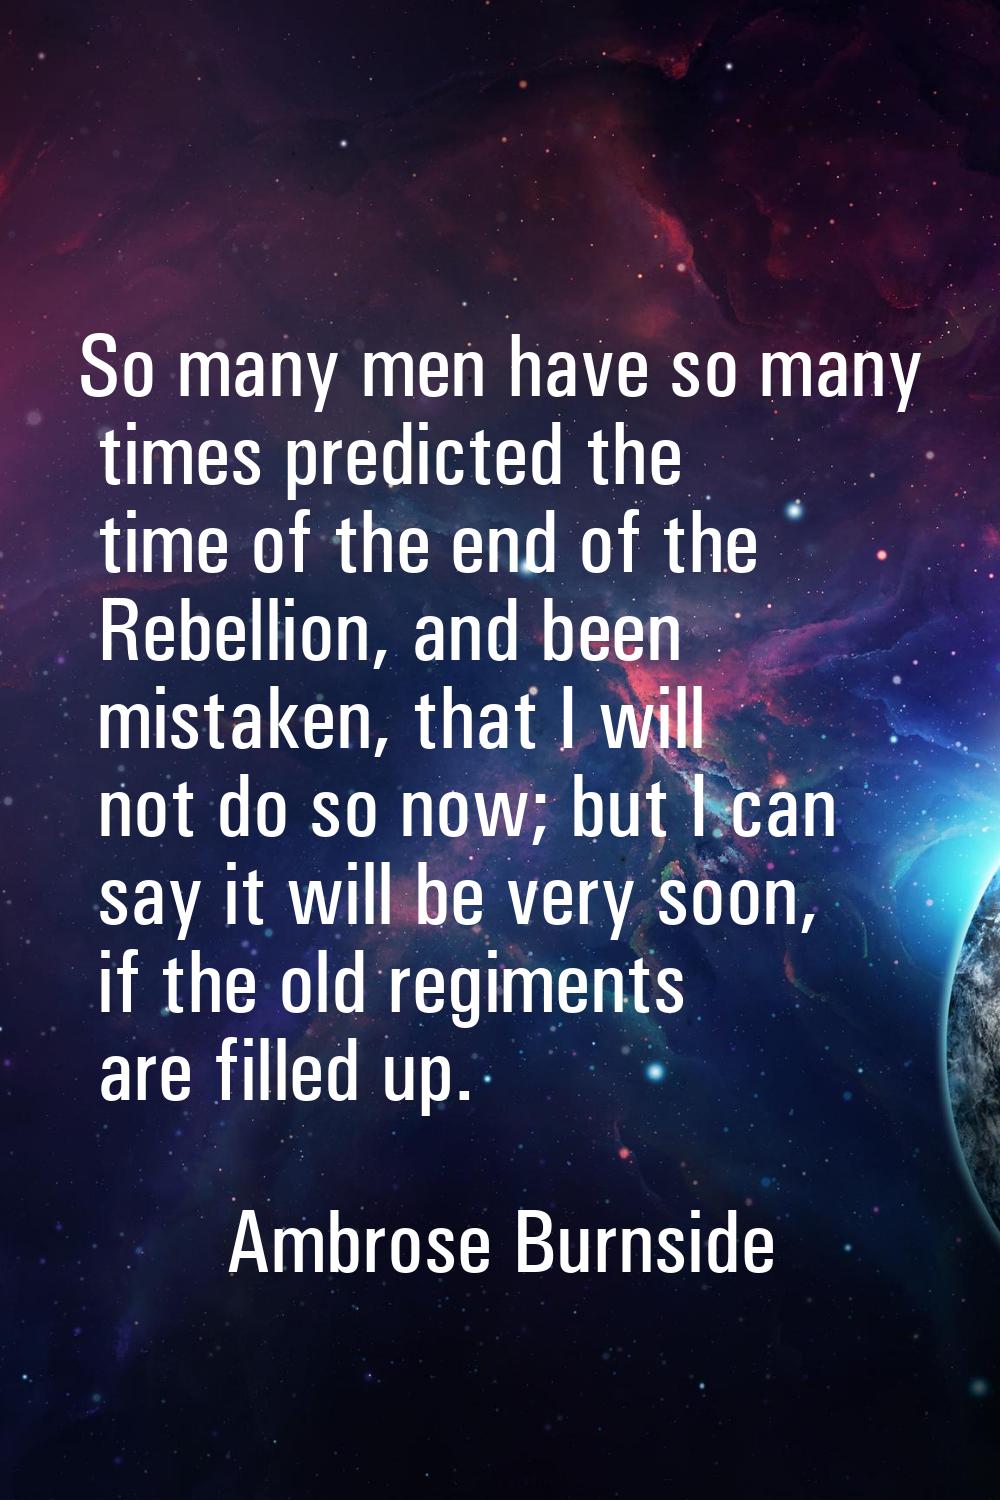 So many men have so many times predicted the time of the end of the Rebellion, and been mistaken, t